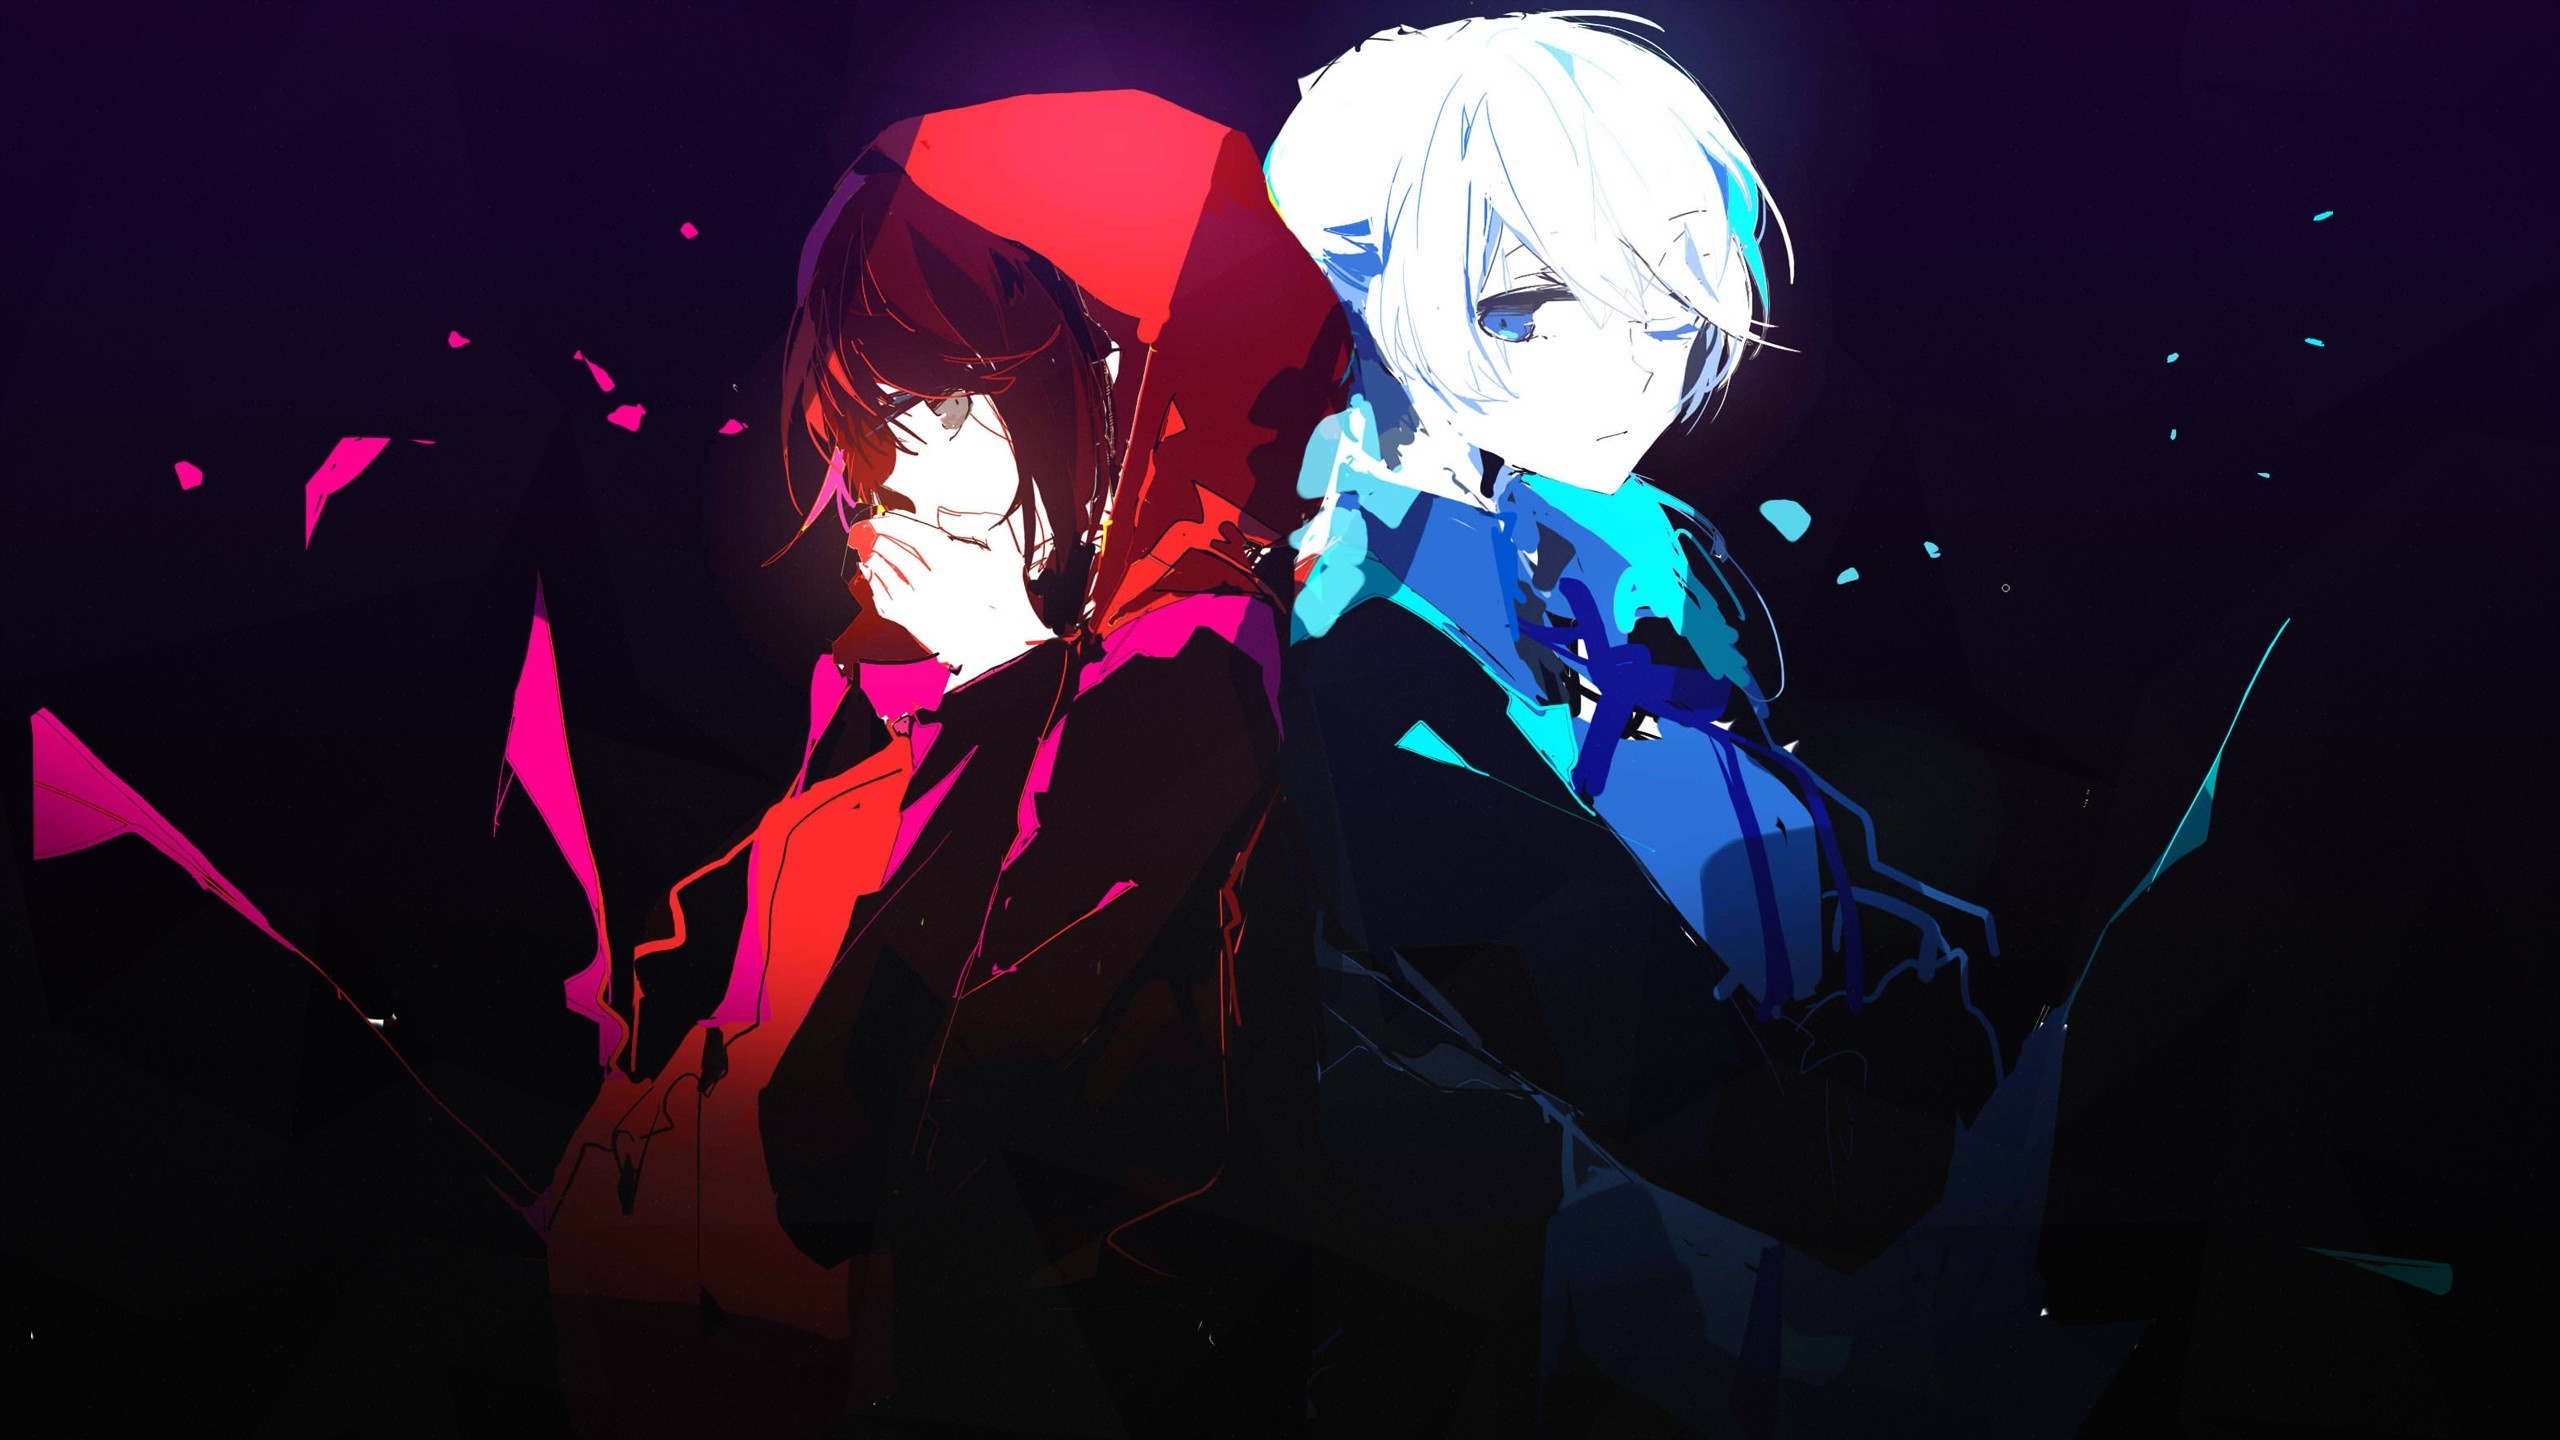 Anime girls, Weiss Schnee, Ruby Rose, RWBY characters, Detailed anime, 2560x1440 HD Desktop